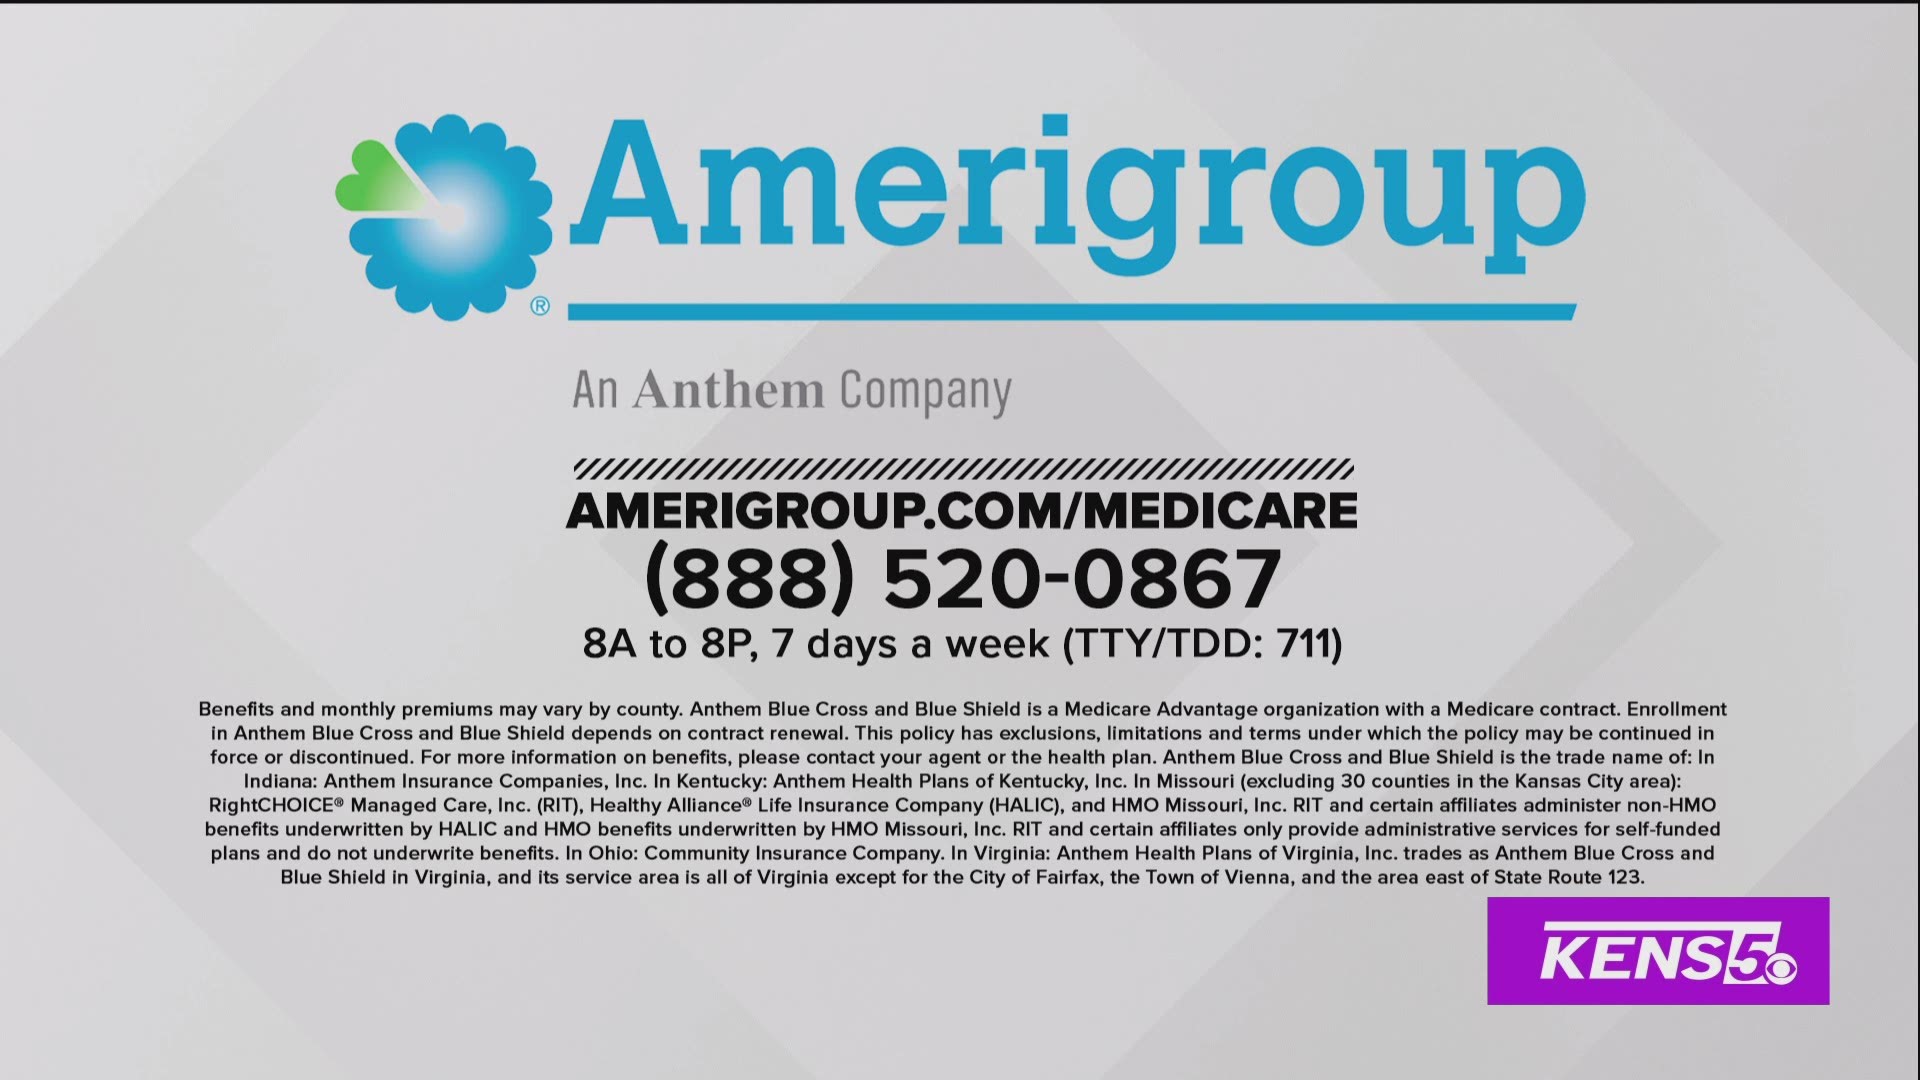 Amerigroup nj medicaid reviews andersen consulting accenture